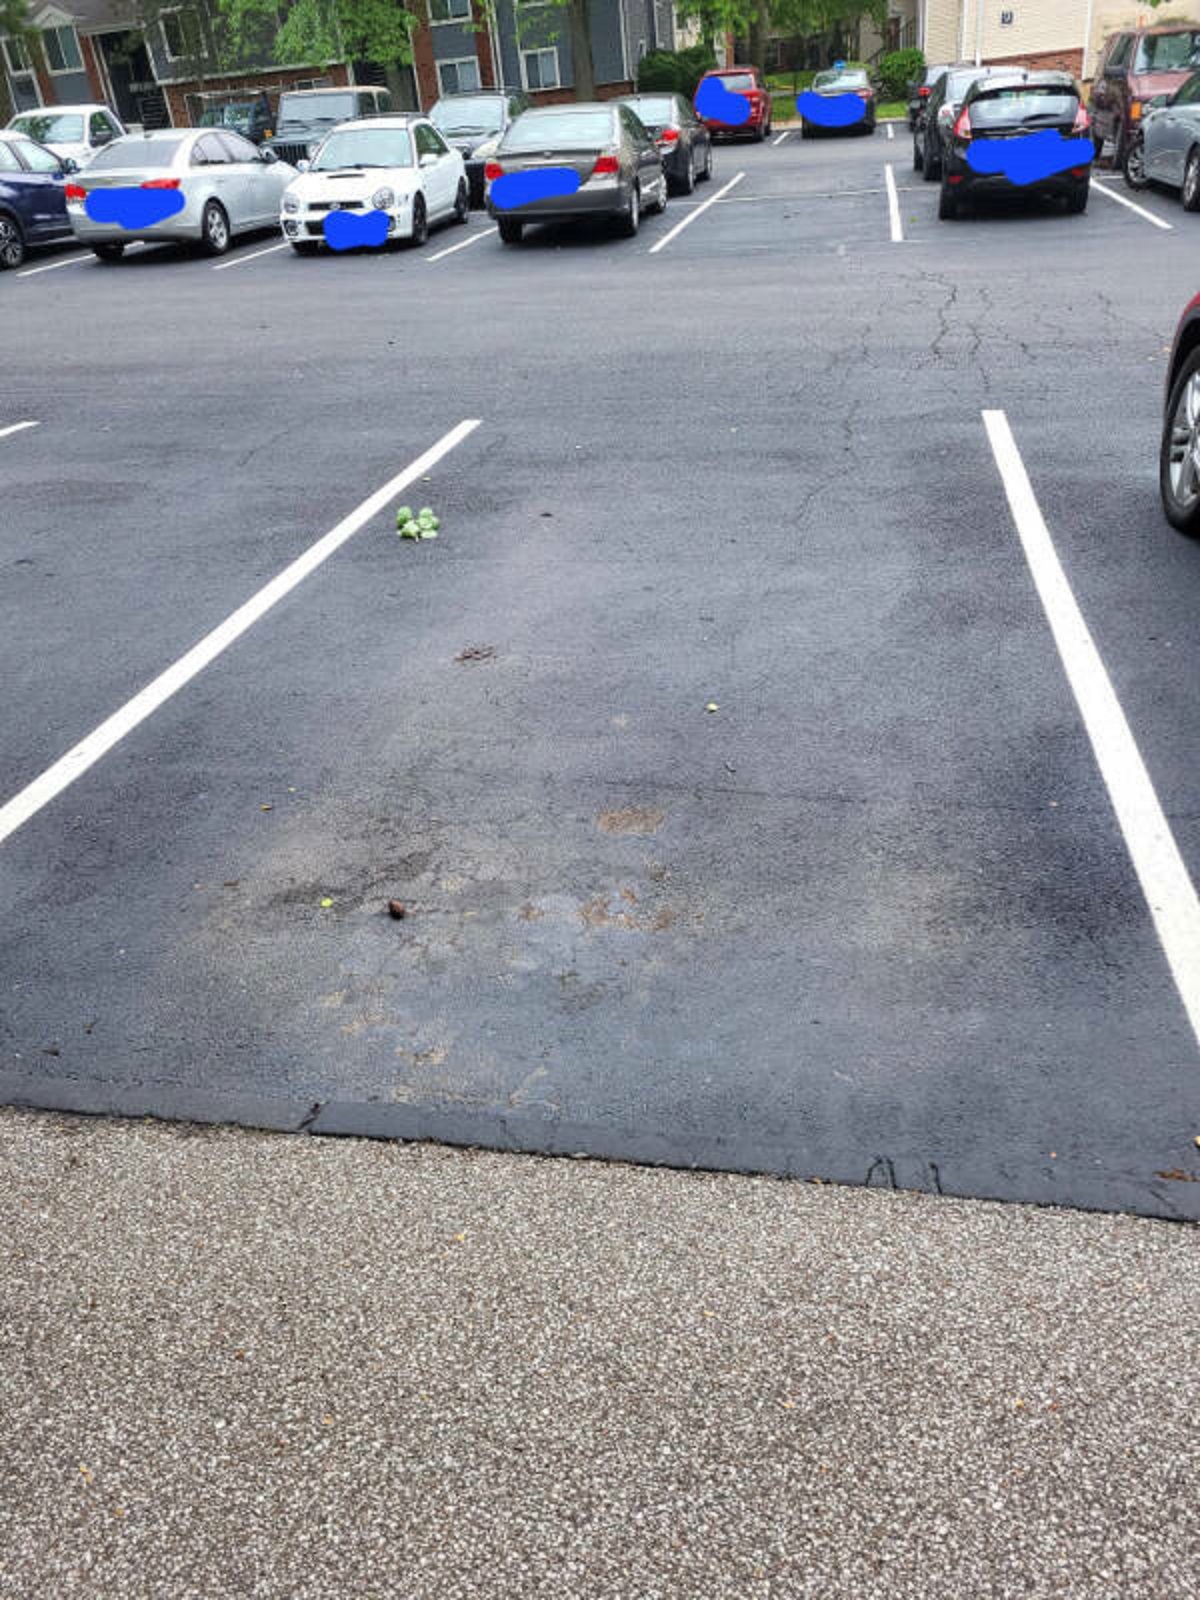 “The last spot I parked my Hyundai in before it disappeared overnight”